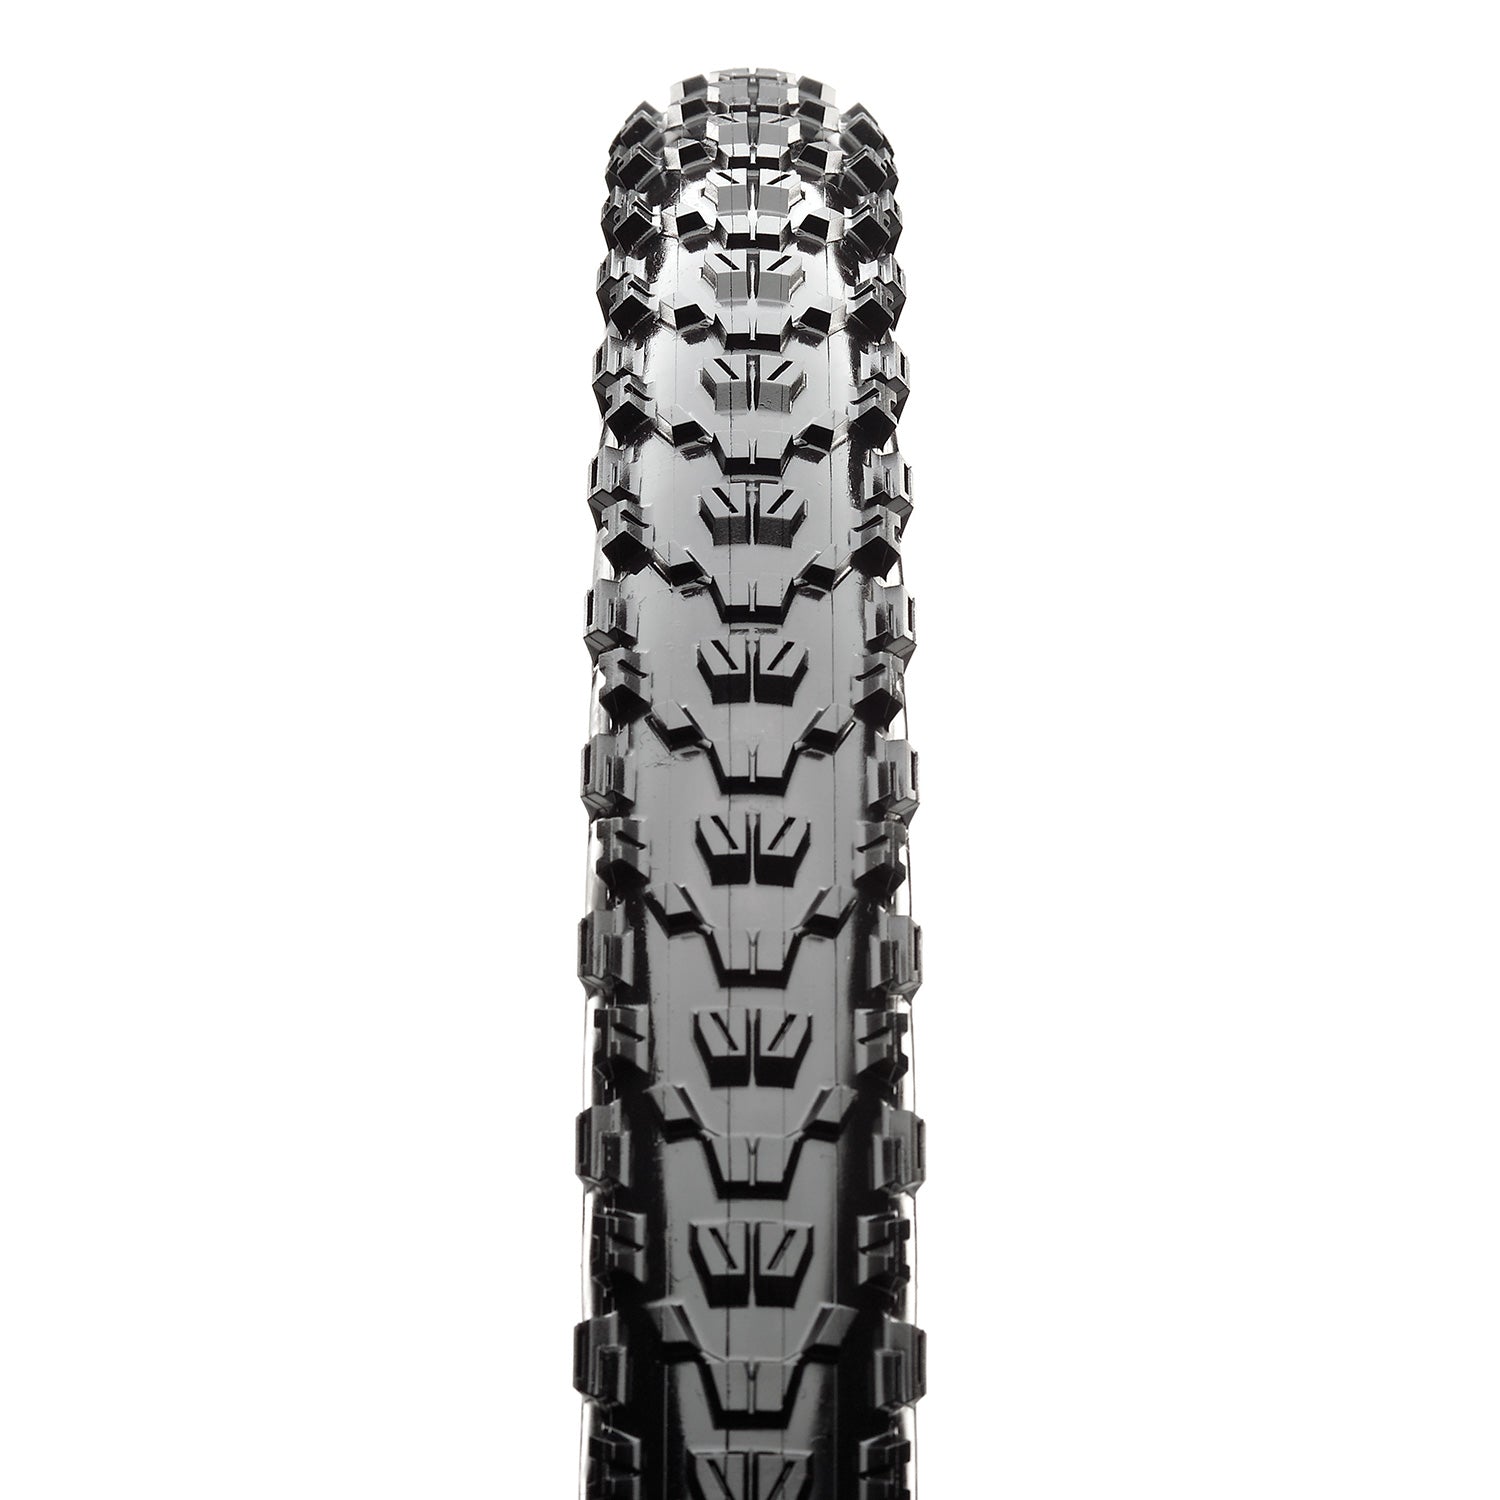 Maxxis Ardent Wirebead 26x2.25